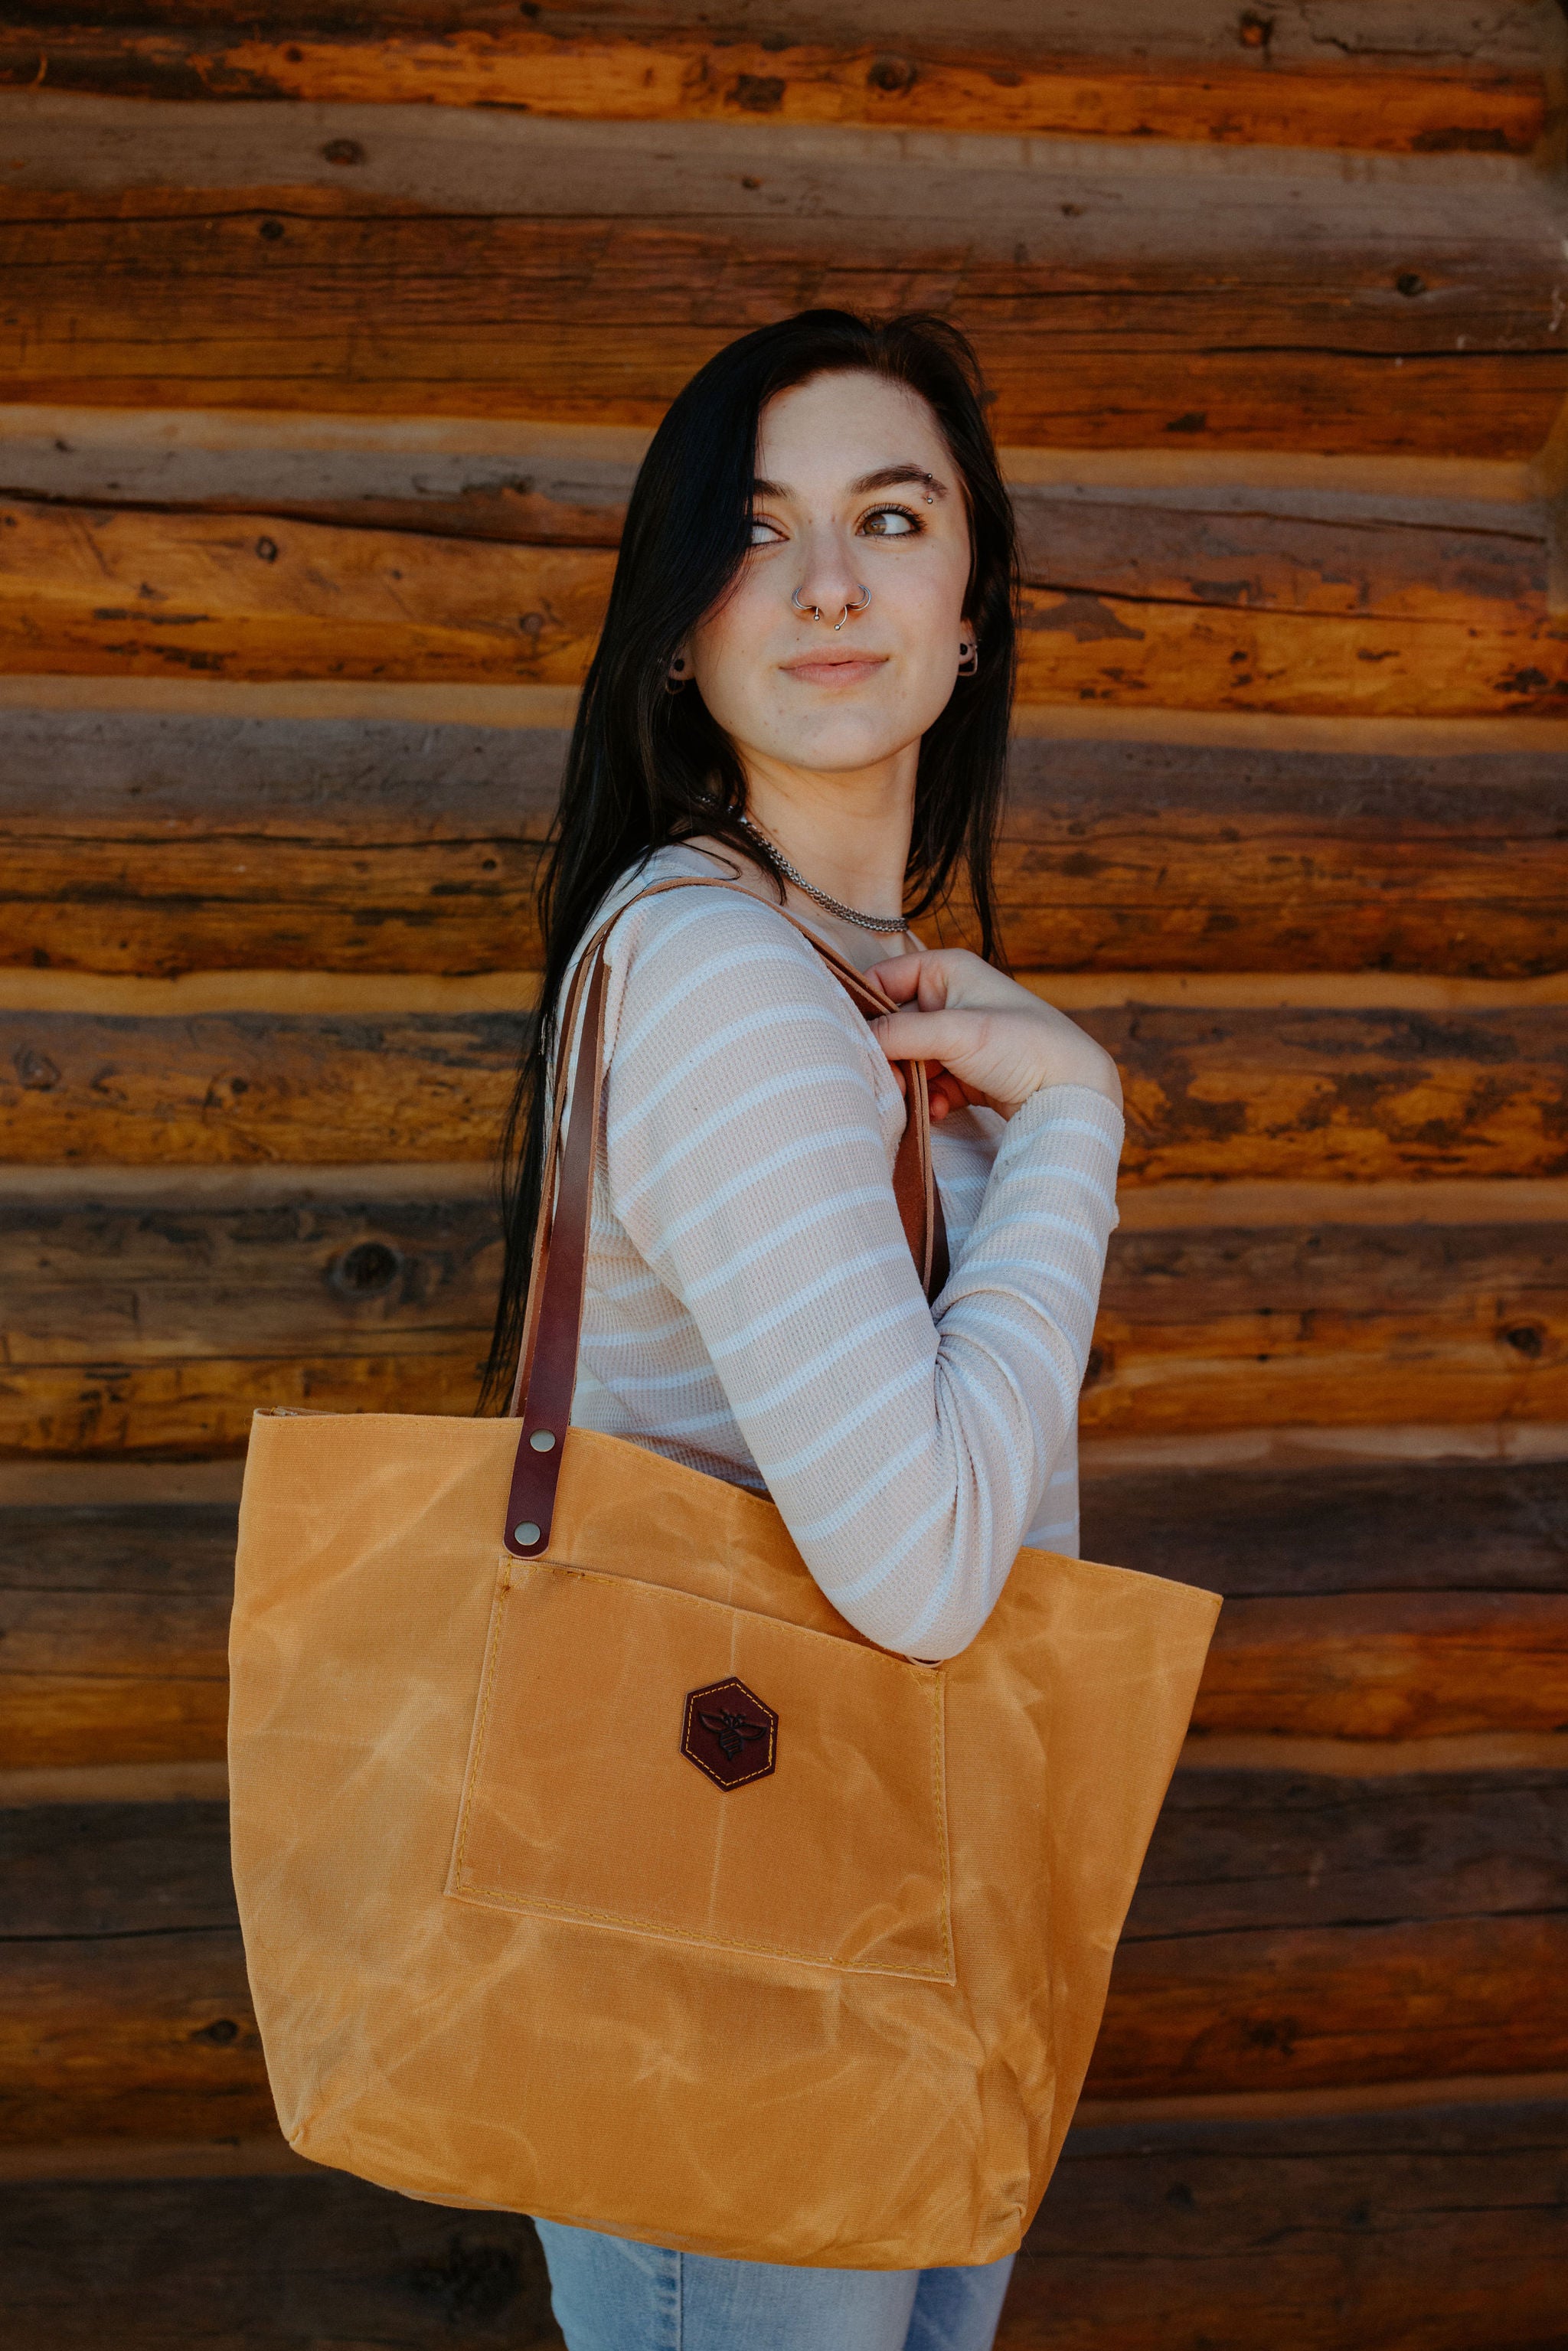 Market Tote, Leather Bags for Women